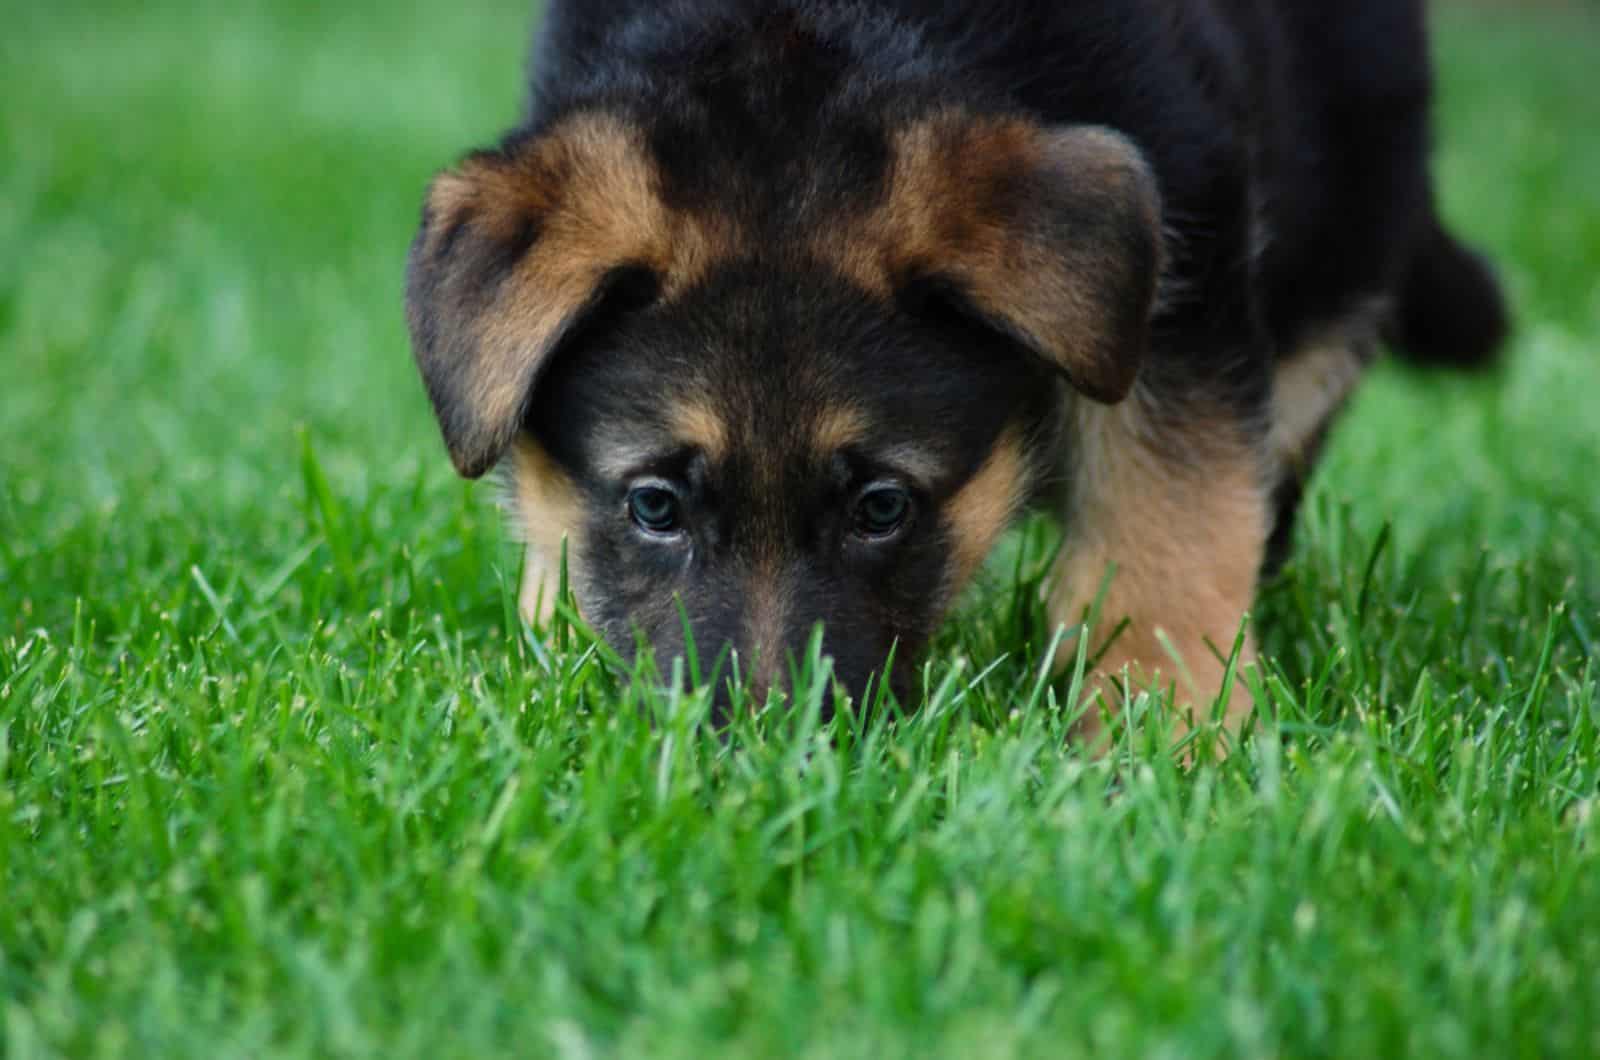 dog sniffing something in grass